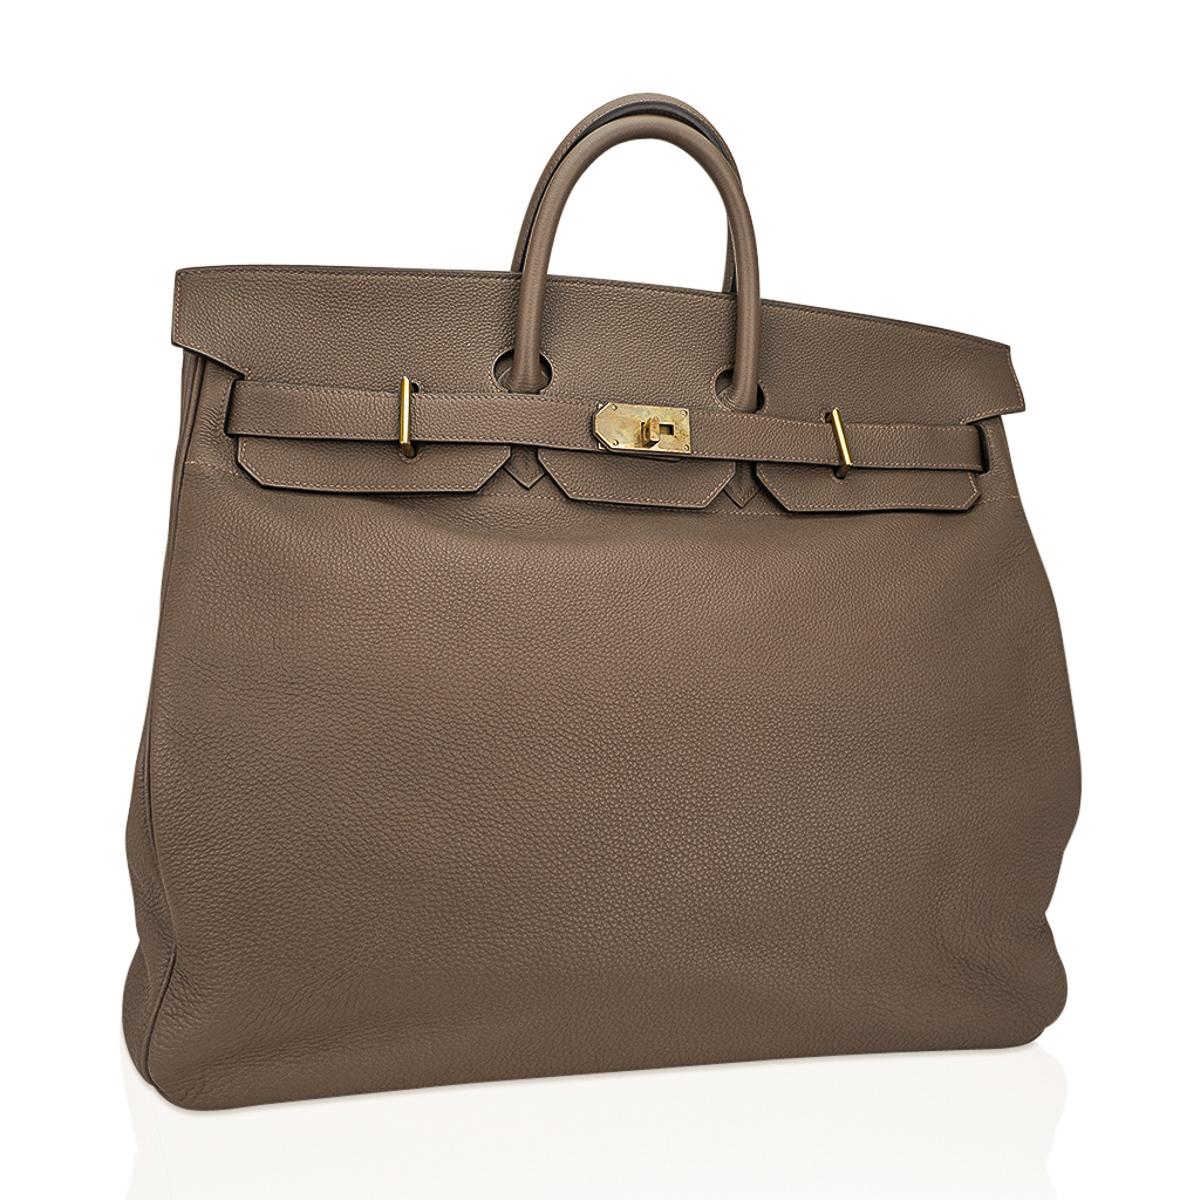 Mightychic offers a rare Hermes HAC 50 bag featured in Etoupe. 
Accentuated with Brass hardware.
Comes with lock, keys and clochette.
The HAC (Haut à Courroies) is an extremely rare and especially stylish Hermes travel bag making it a collector’s